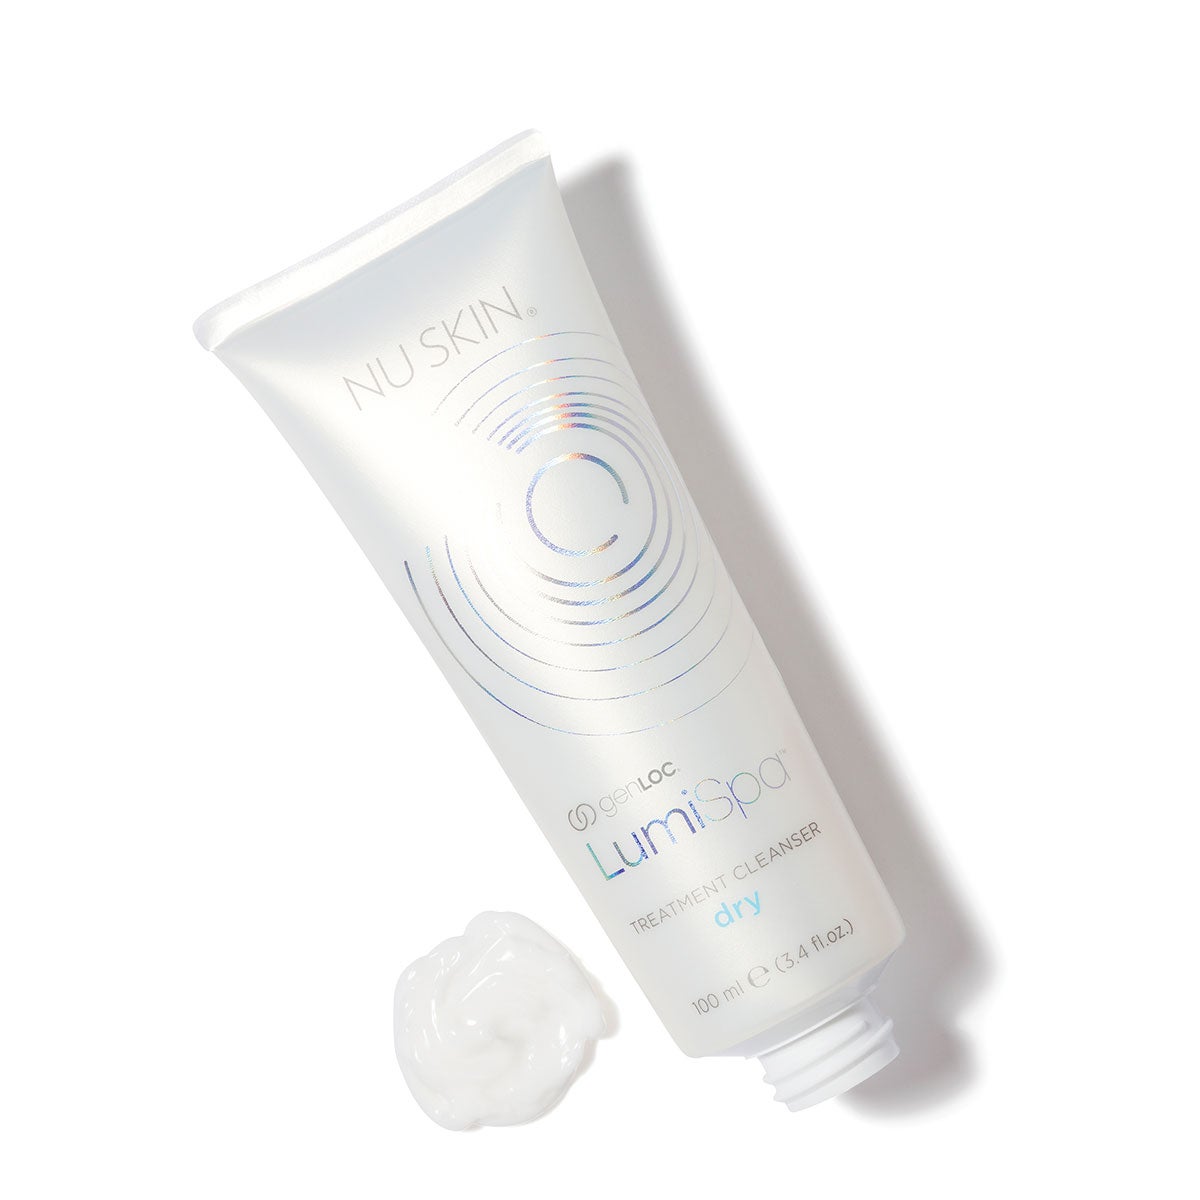 LumiSpa Cleanser Dry White Background with Product